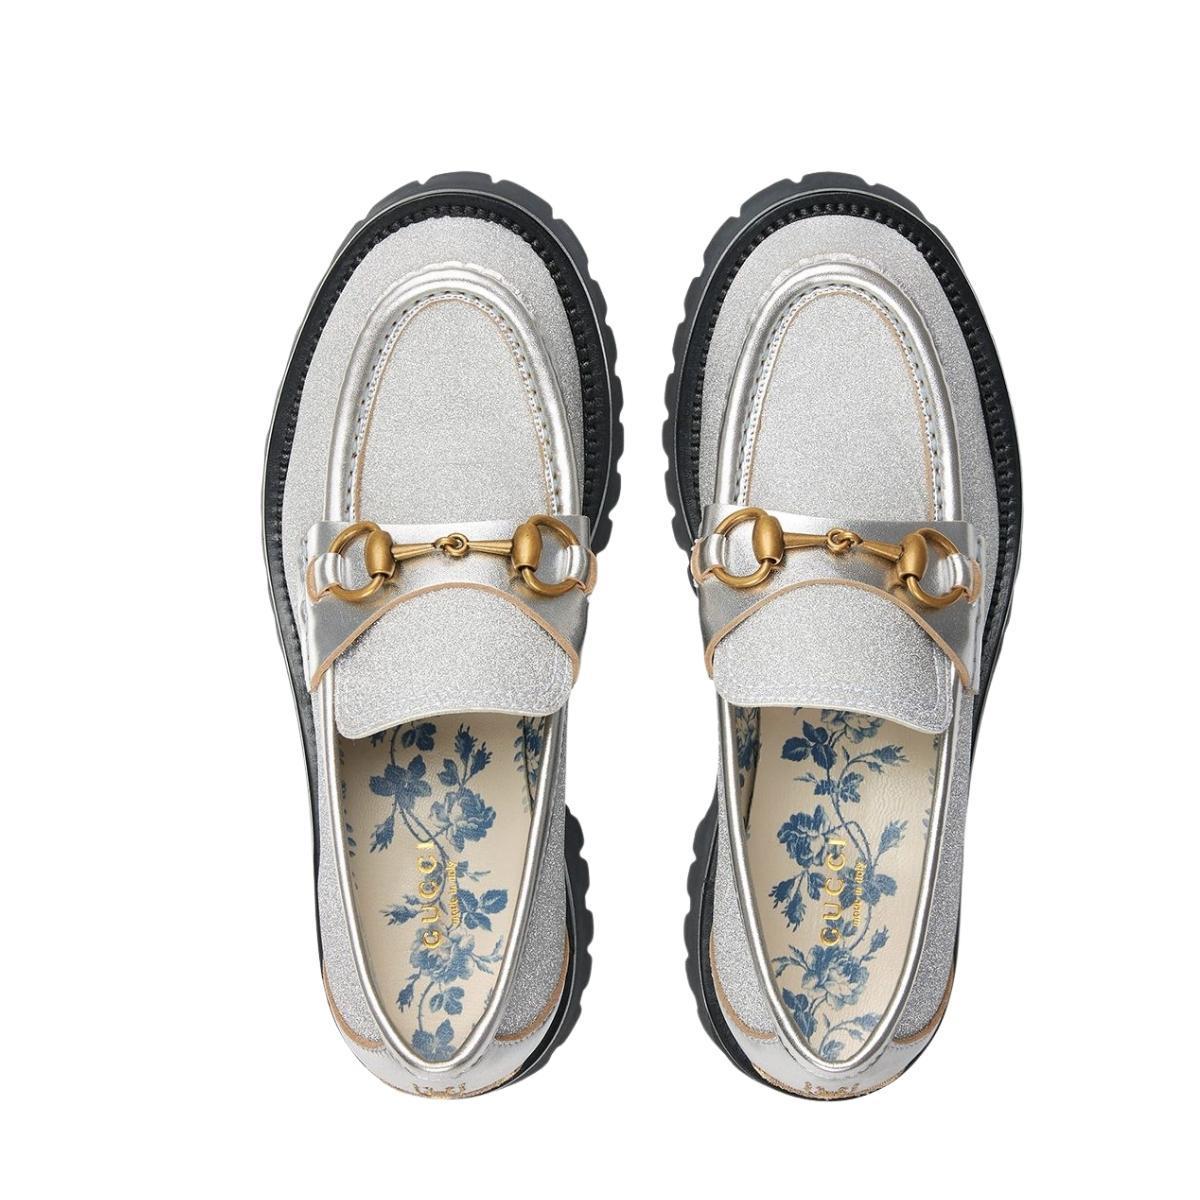 Horsebit lug sole glitter loafers
Silver leather
Glitter detailing
Signature Horsebit detail
Embroidered bee detail
Branded insole
Rubber lug sole
Composition: Leather 100%
Lining: Leather 100%
Sole: Rubber 100%
Height: 1